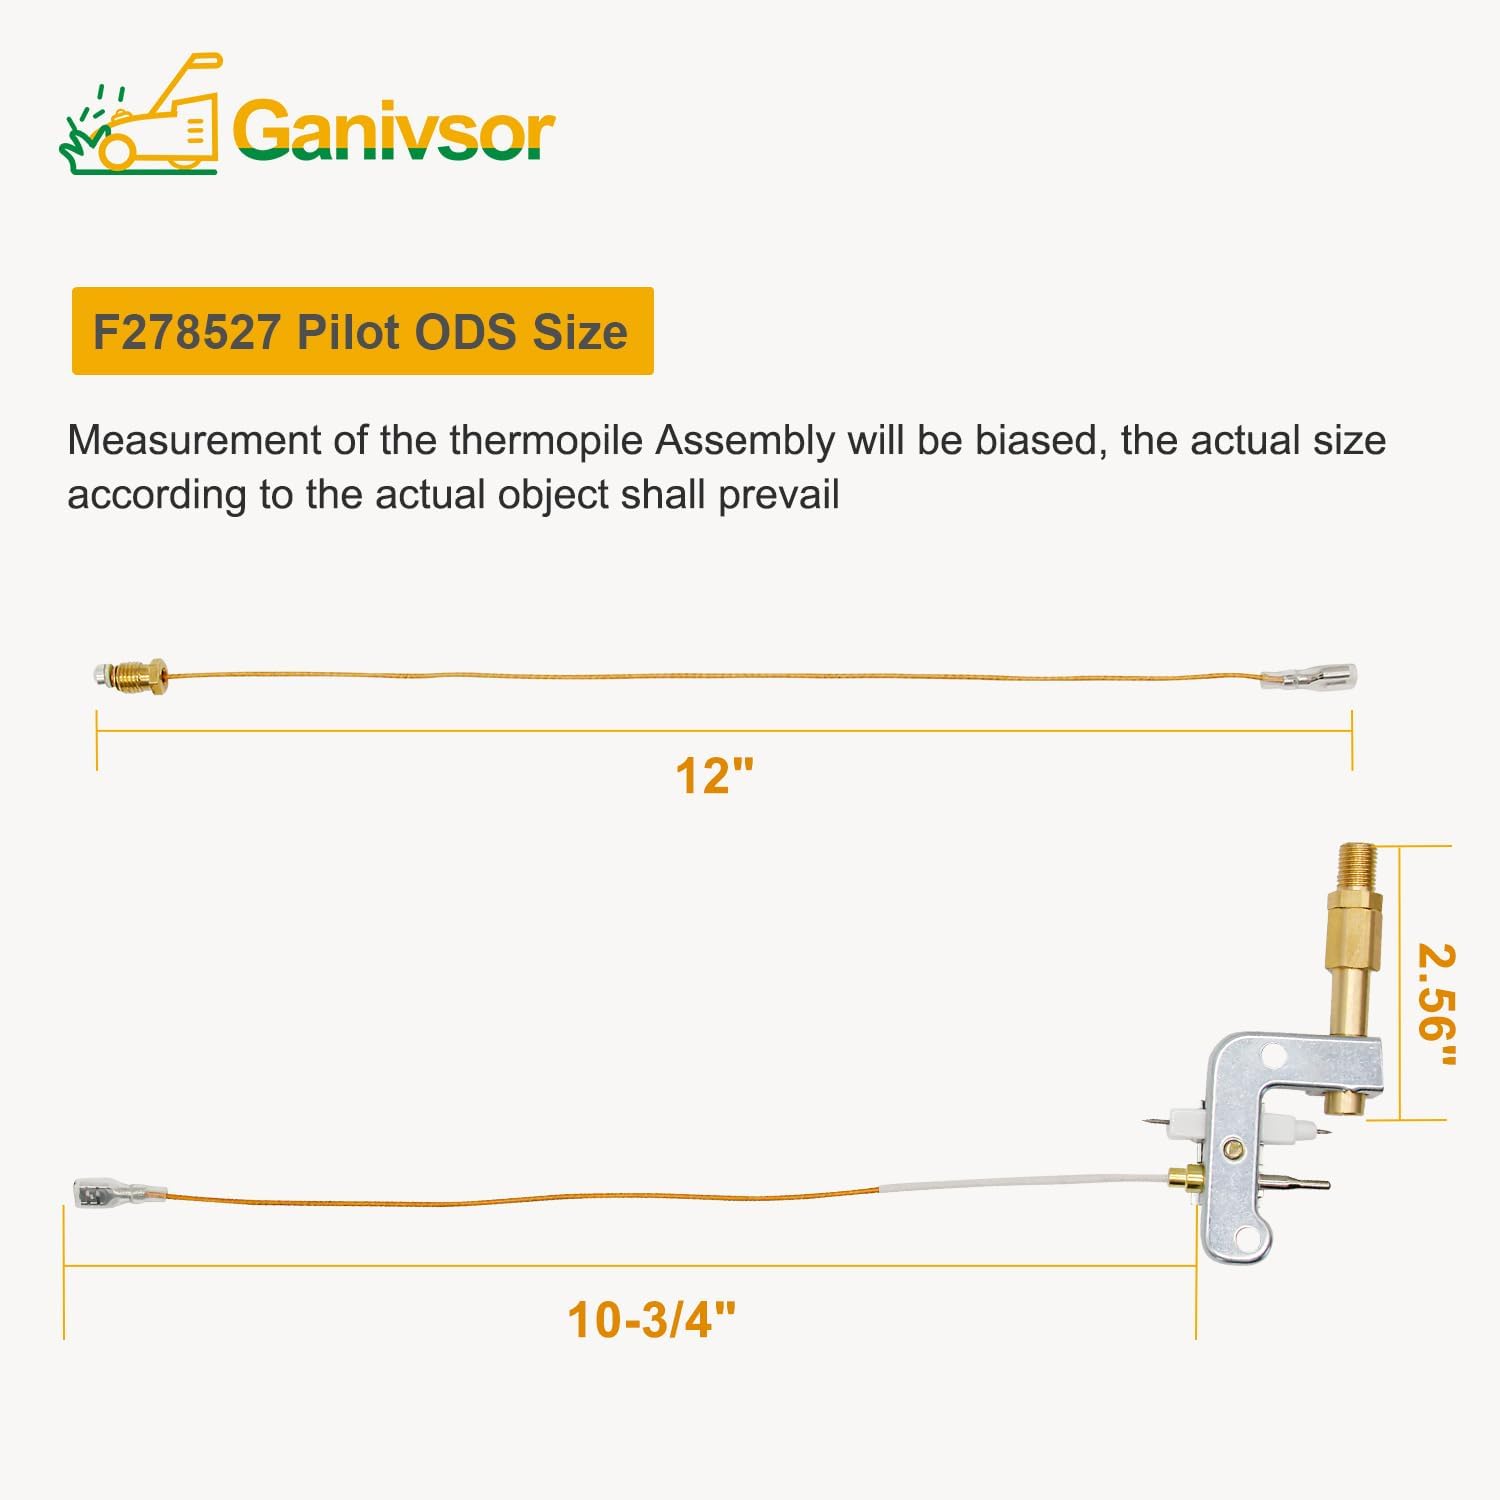 Ganivsor F278527 Pilot Assembly Portable ODS for Mr.Heater Big Buddy MH18B MH9B MH9BX and Dewalt Small Propane Heater Parts - 78422 Space Heater Pilot - Ganivsor F278527 Pilot Assembly Portable ODS Review